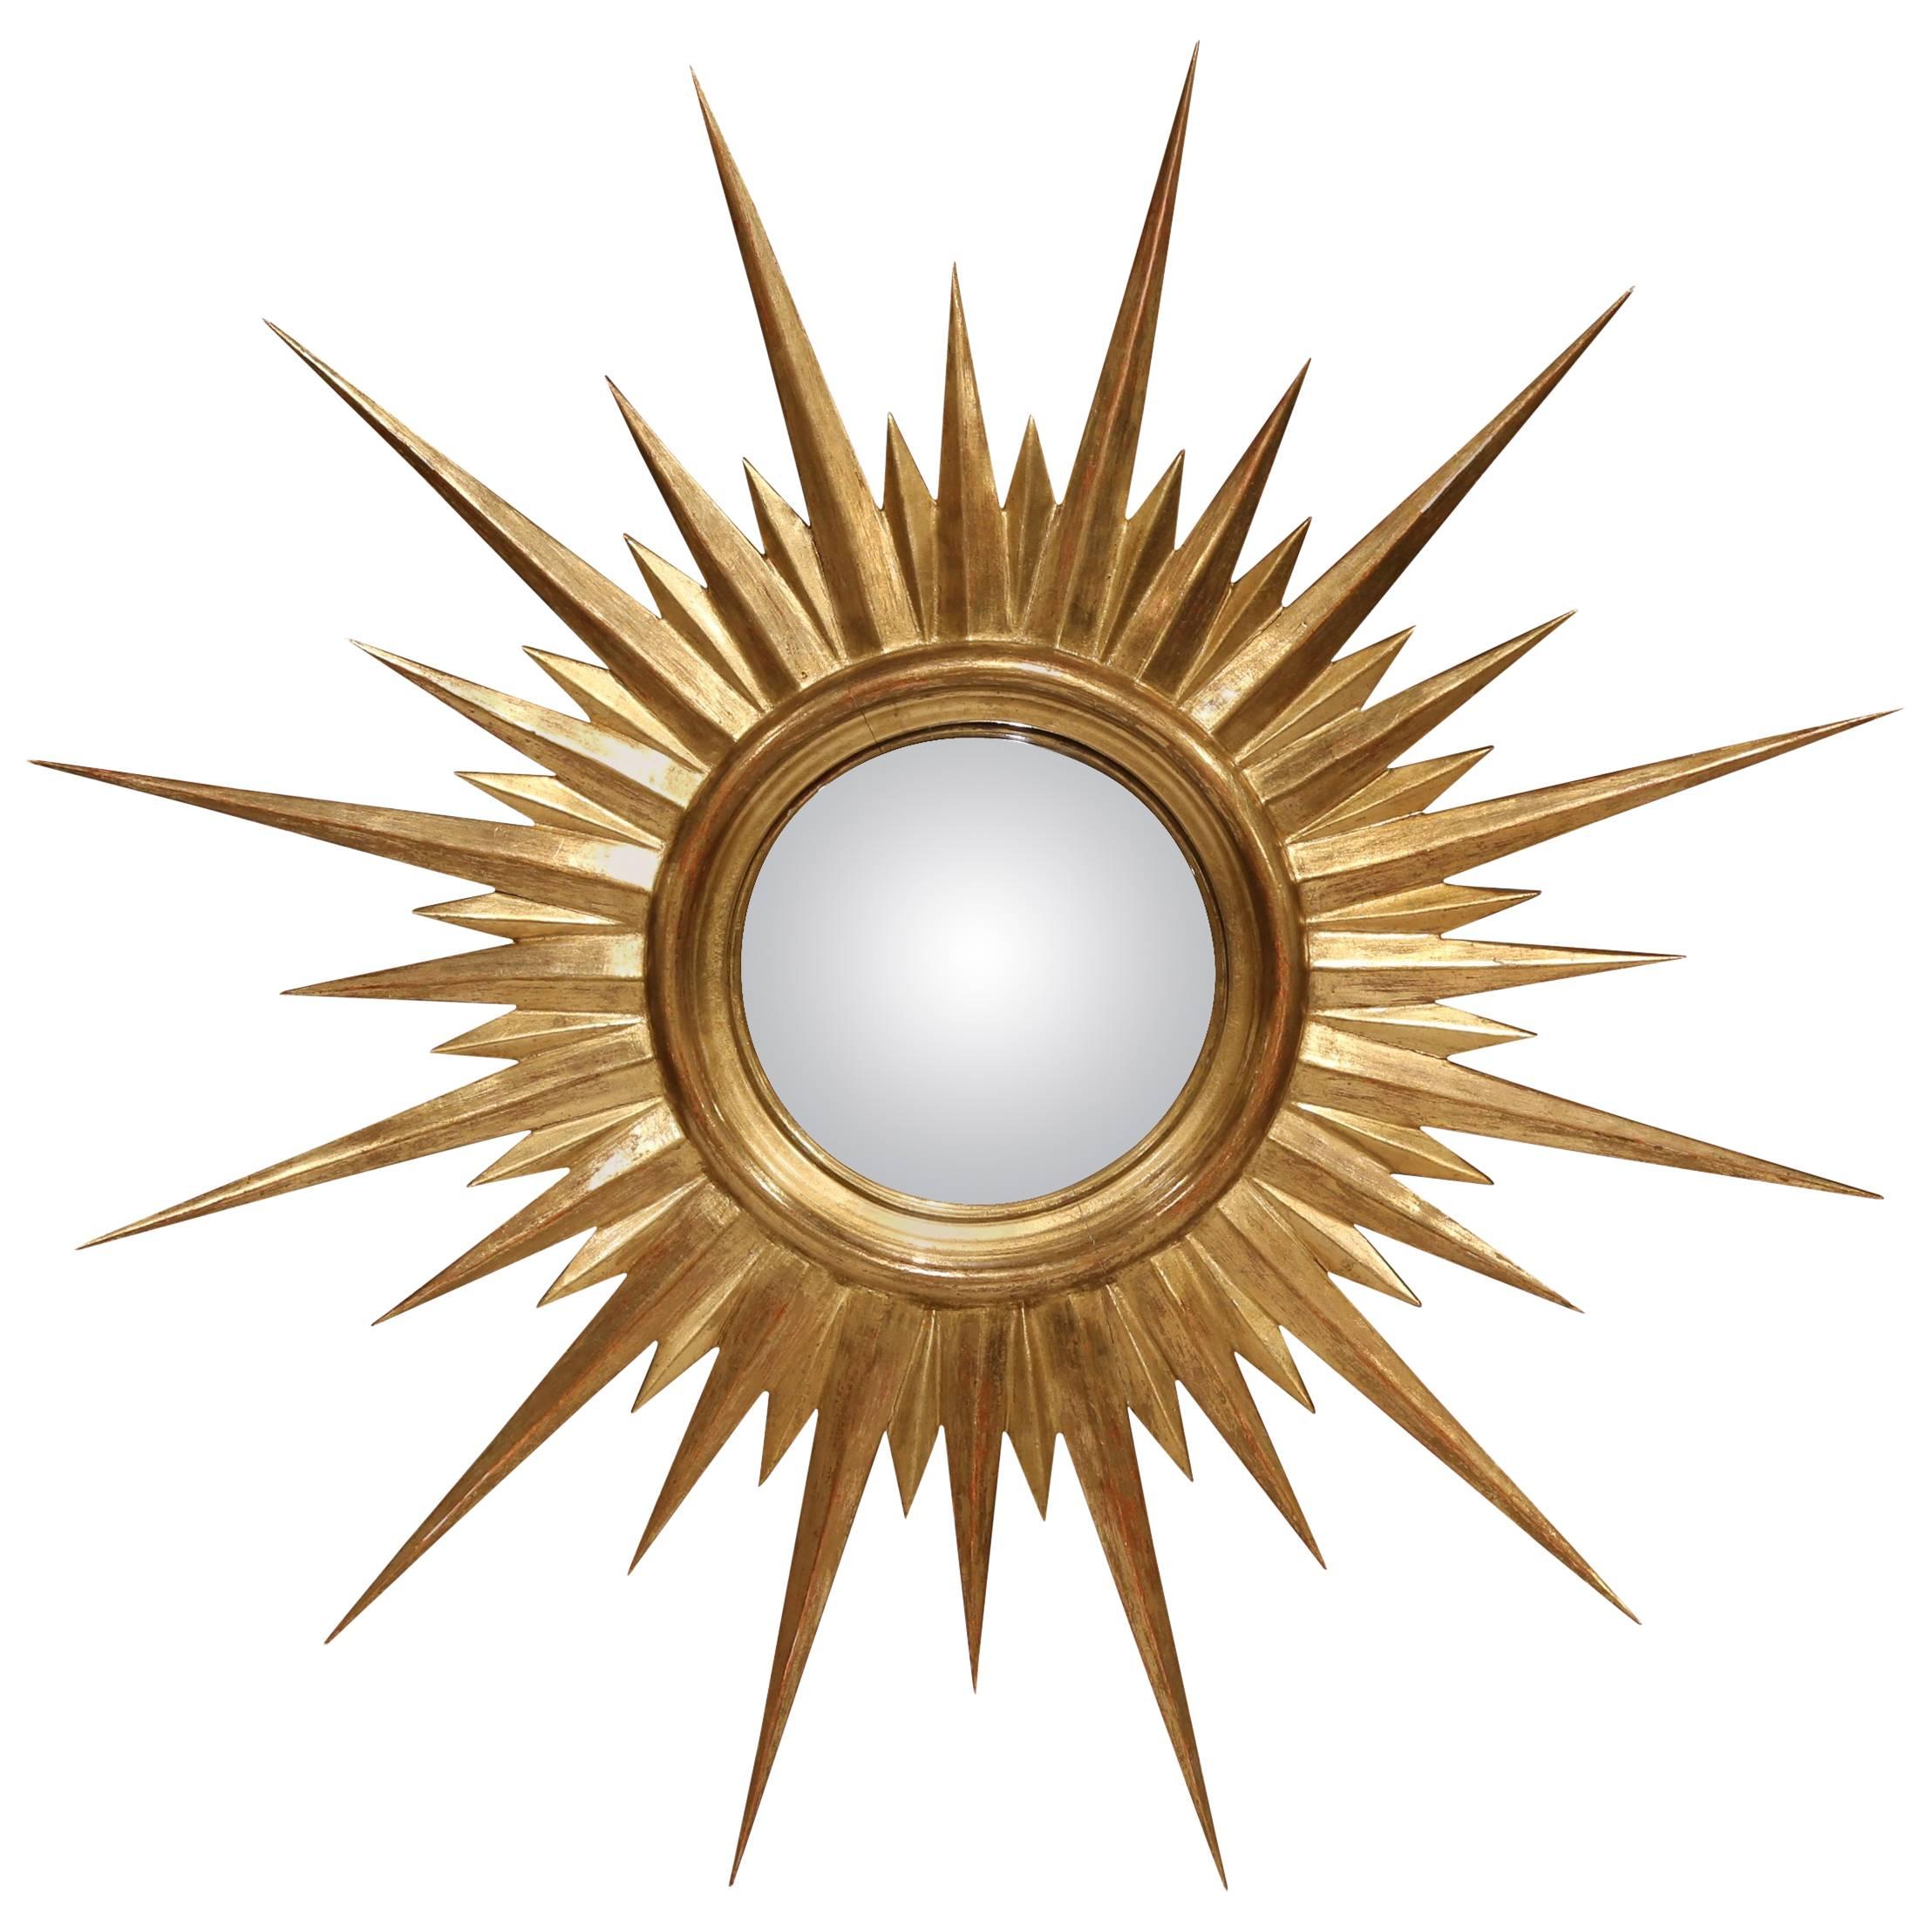 Mid-20th Century French Giltwood Sunburst Mirror with Convex Glass